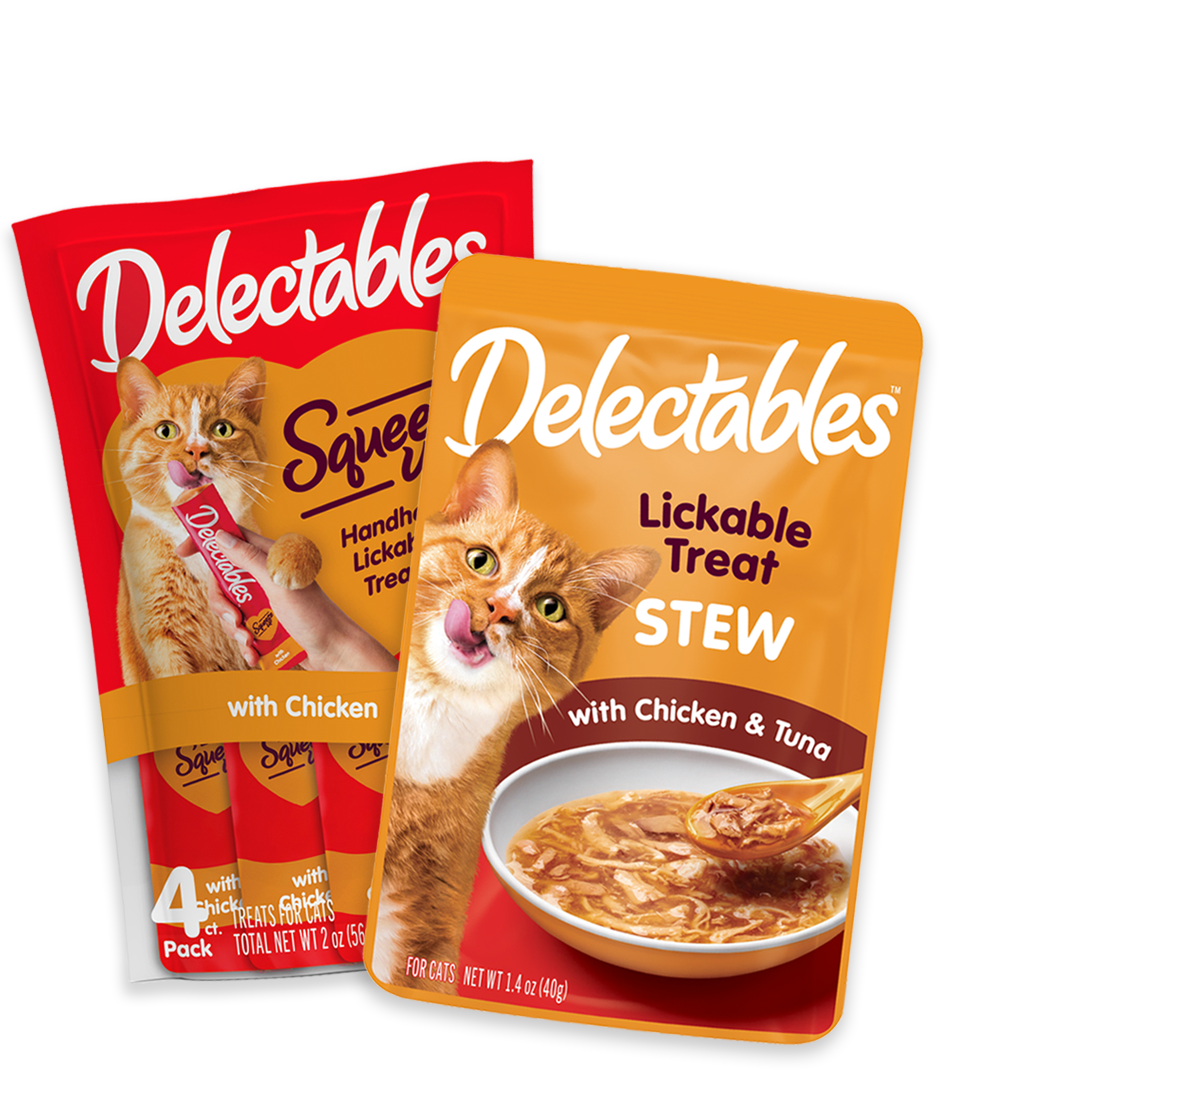 Delectables Squeeze up and Lickable treats for cats.